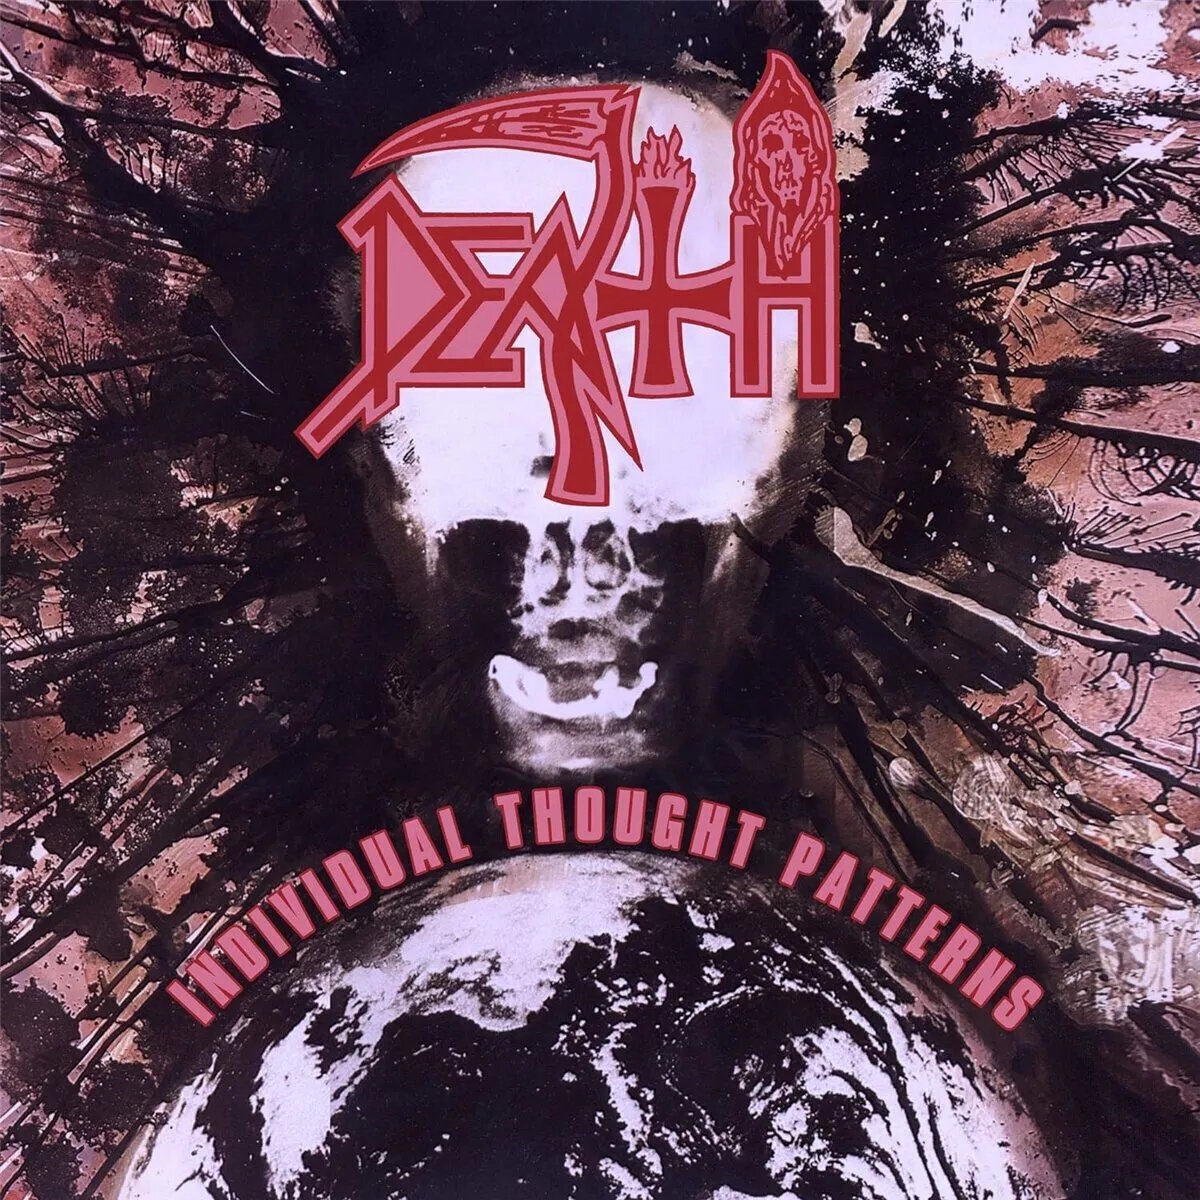 LP platňa Death - Individual Thought Patterns (Tri Colour Merge Splatter Coloured) (Deluxe Edition) (Limited Edition) (Reissue) (Remastered) (LP)